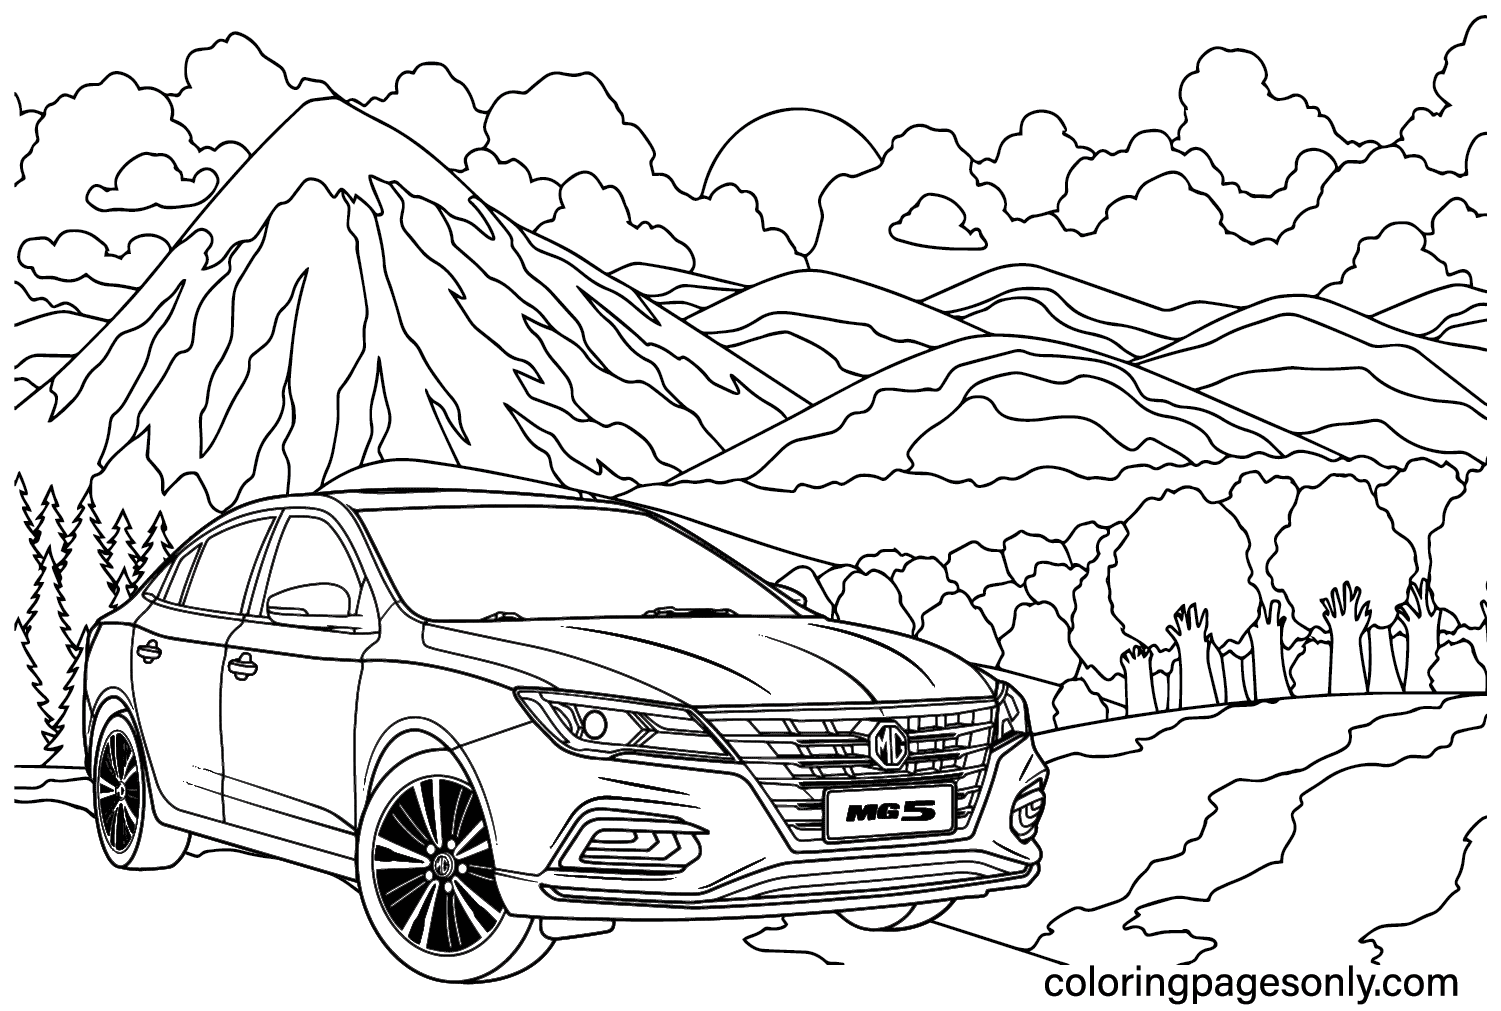 MG 5 Coloring Page